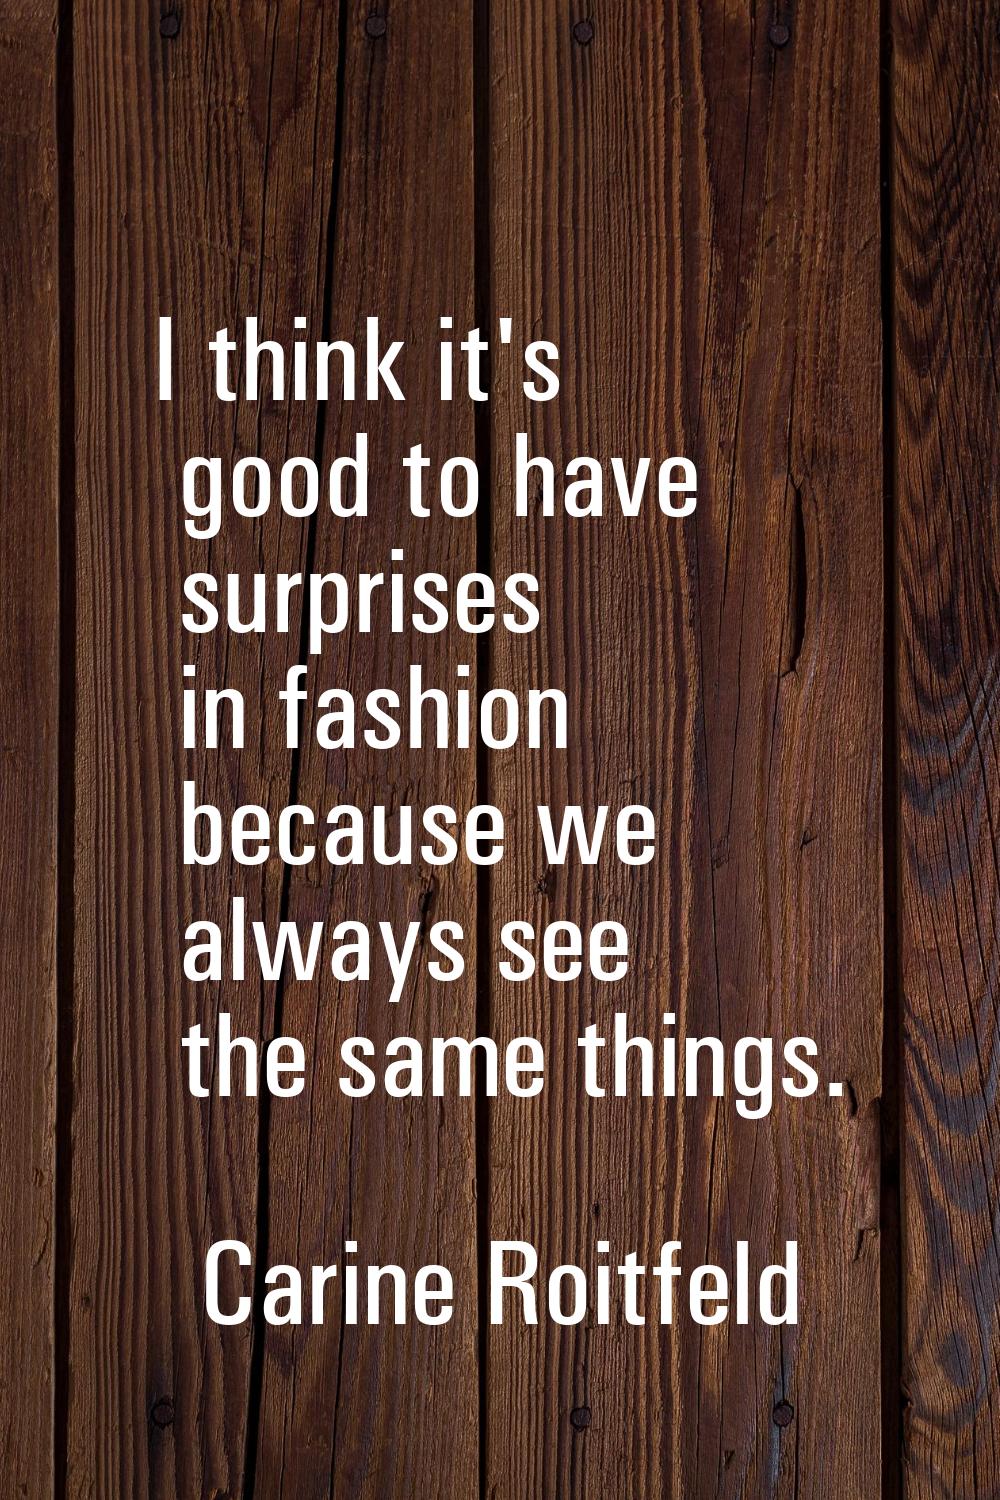 I think it's good to have surprises in fashion because we always see the same things.